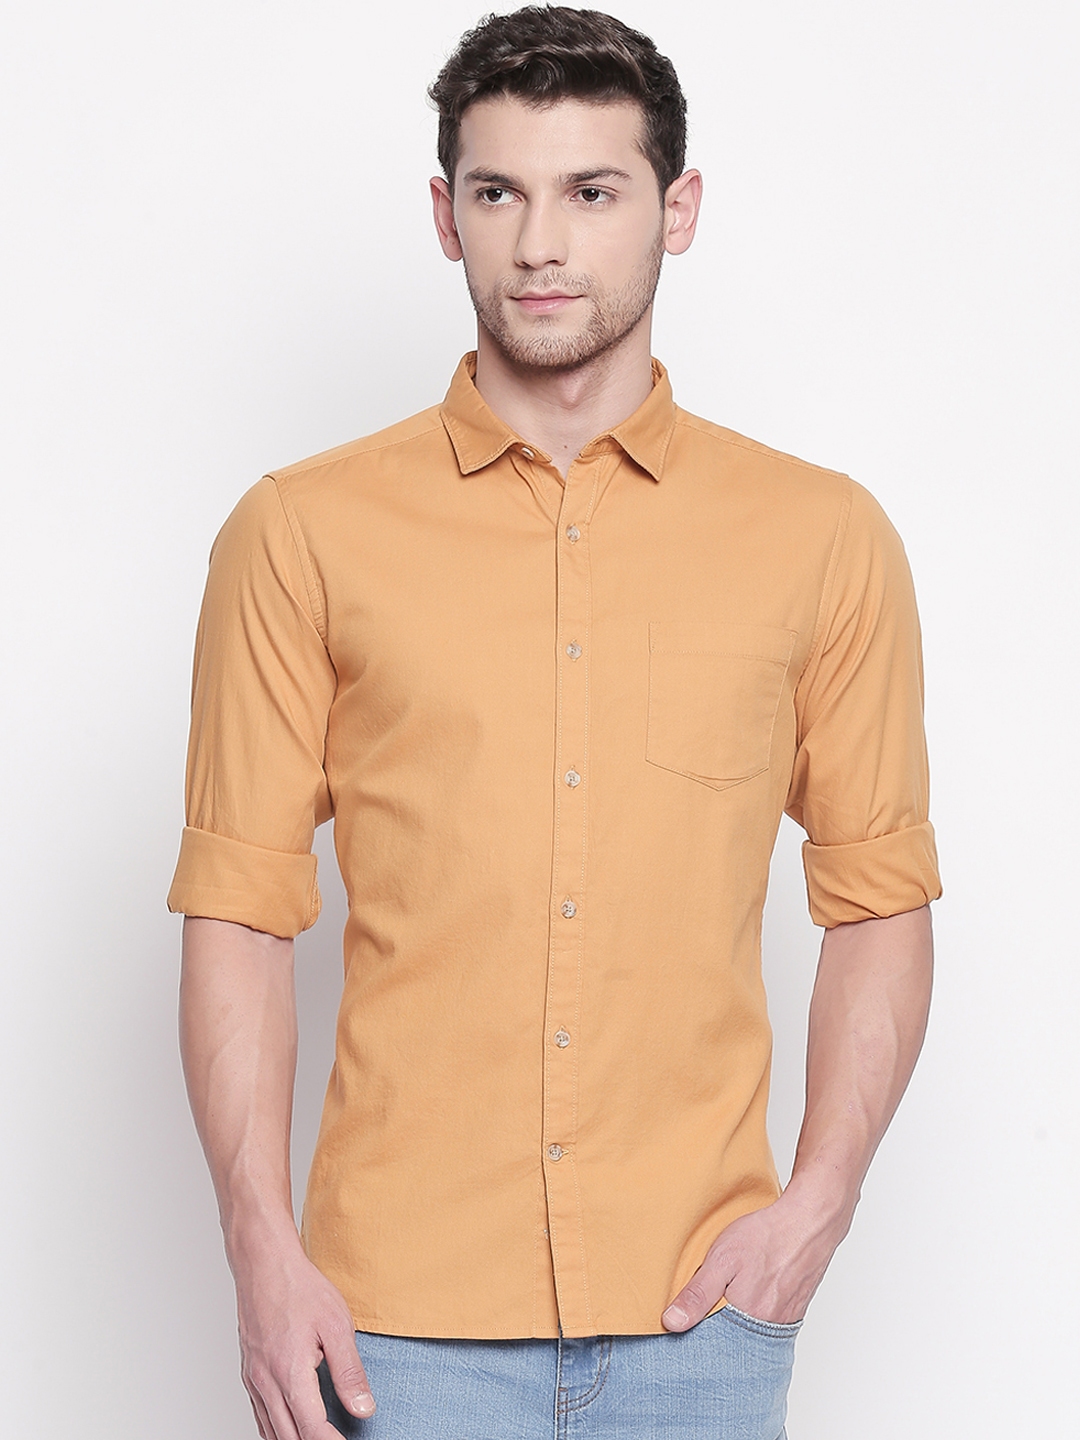 Buy BYFORD By Pantaloons Men Yellow Slim Fit Solid Casual Shirt ...